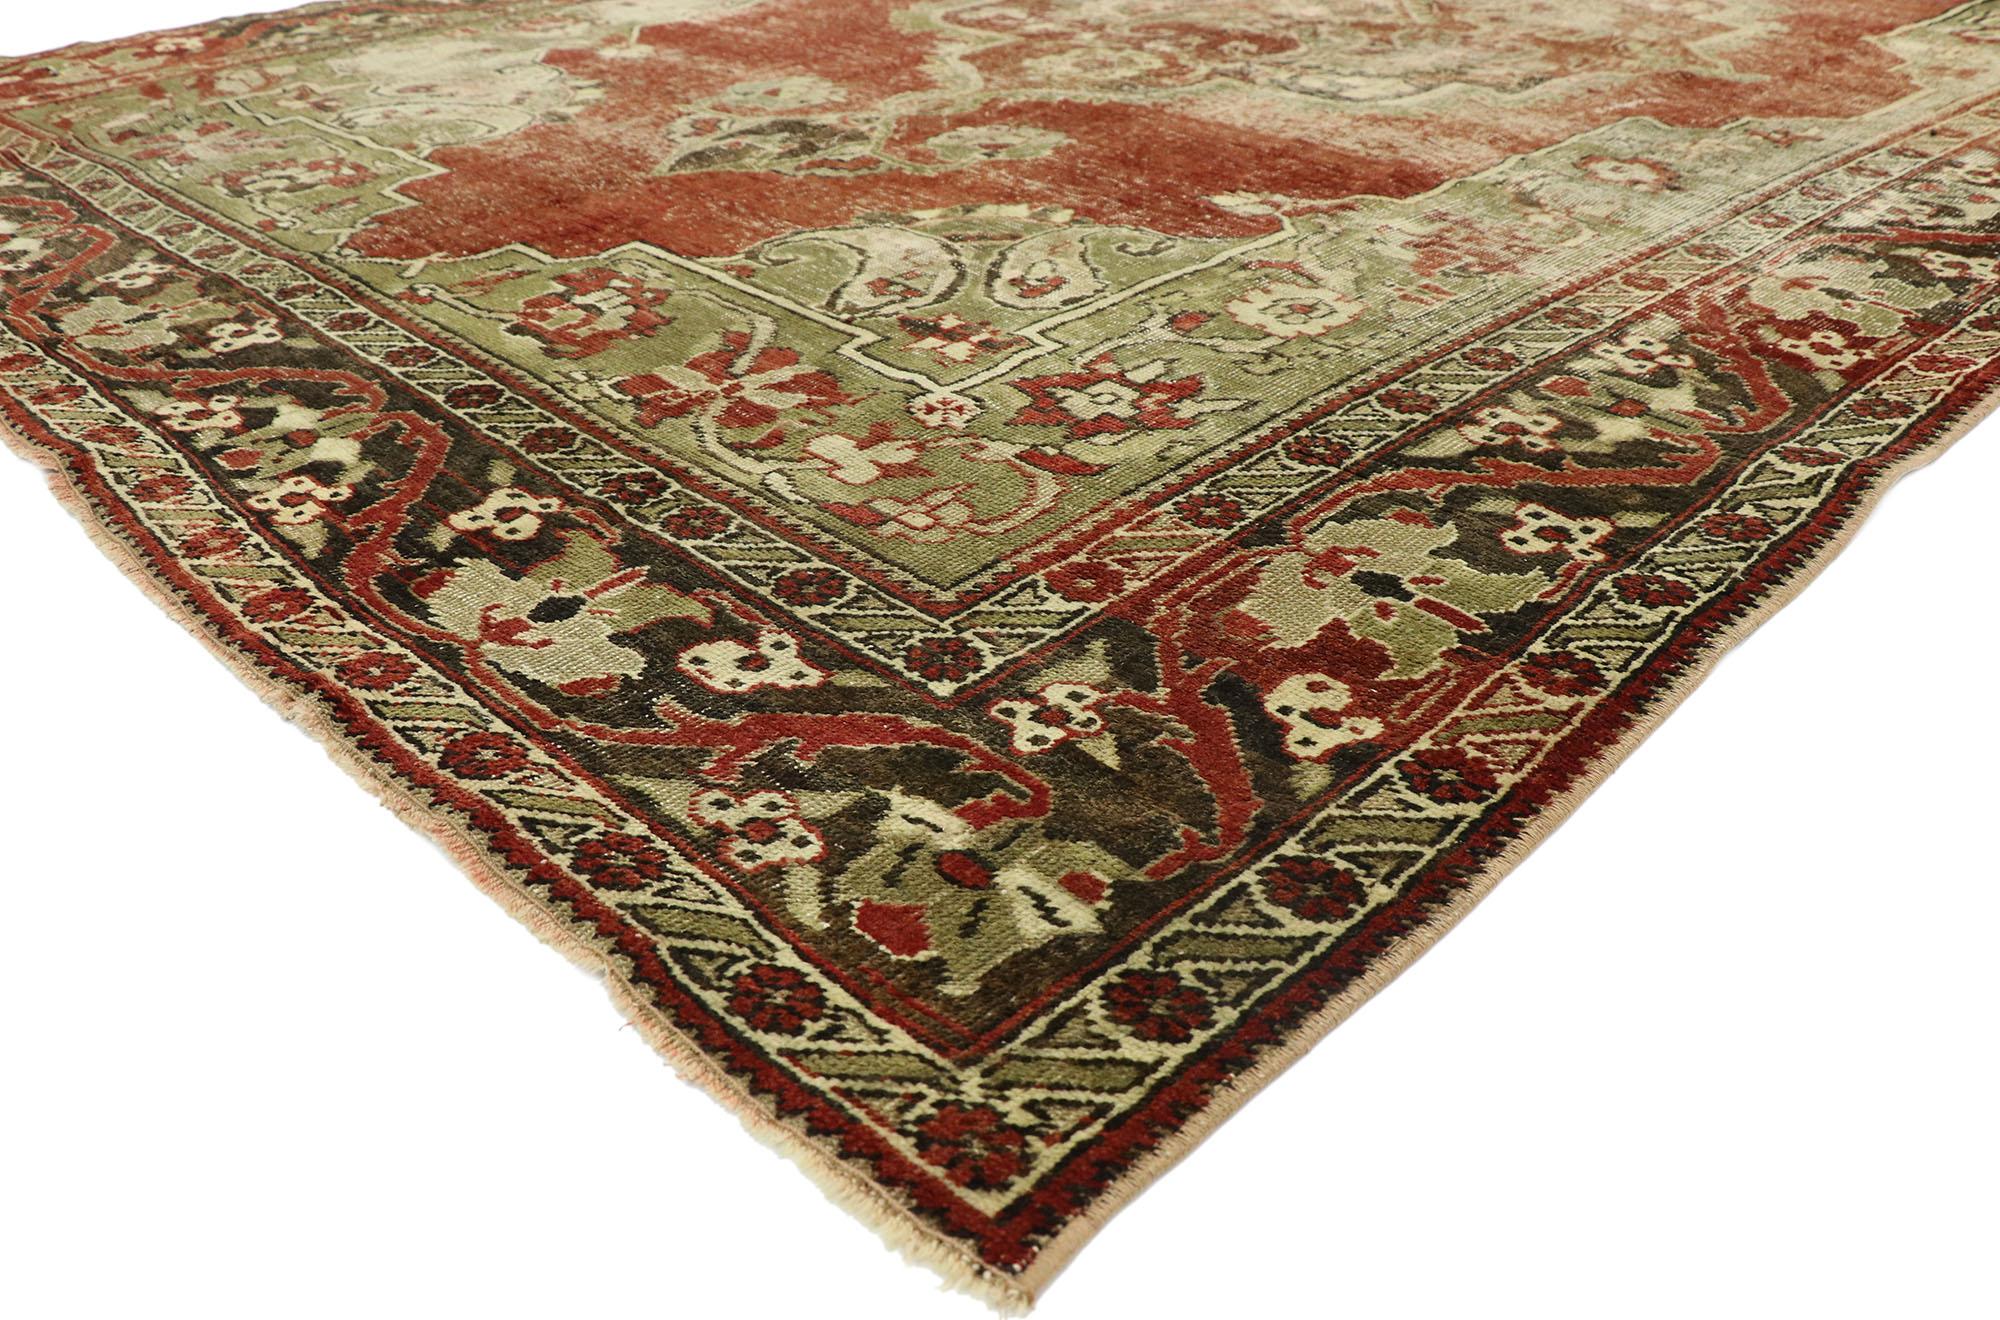 52768, distressed vintage Turkish Oushak rug with rustic English Manor style. With warm spice-tones and lovingly timeworn appearance, this hand knotted wool distressed vintage Turkish Oushak rug embraces rustic English Manor style. It features a